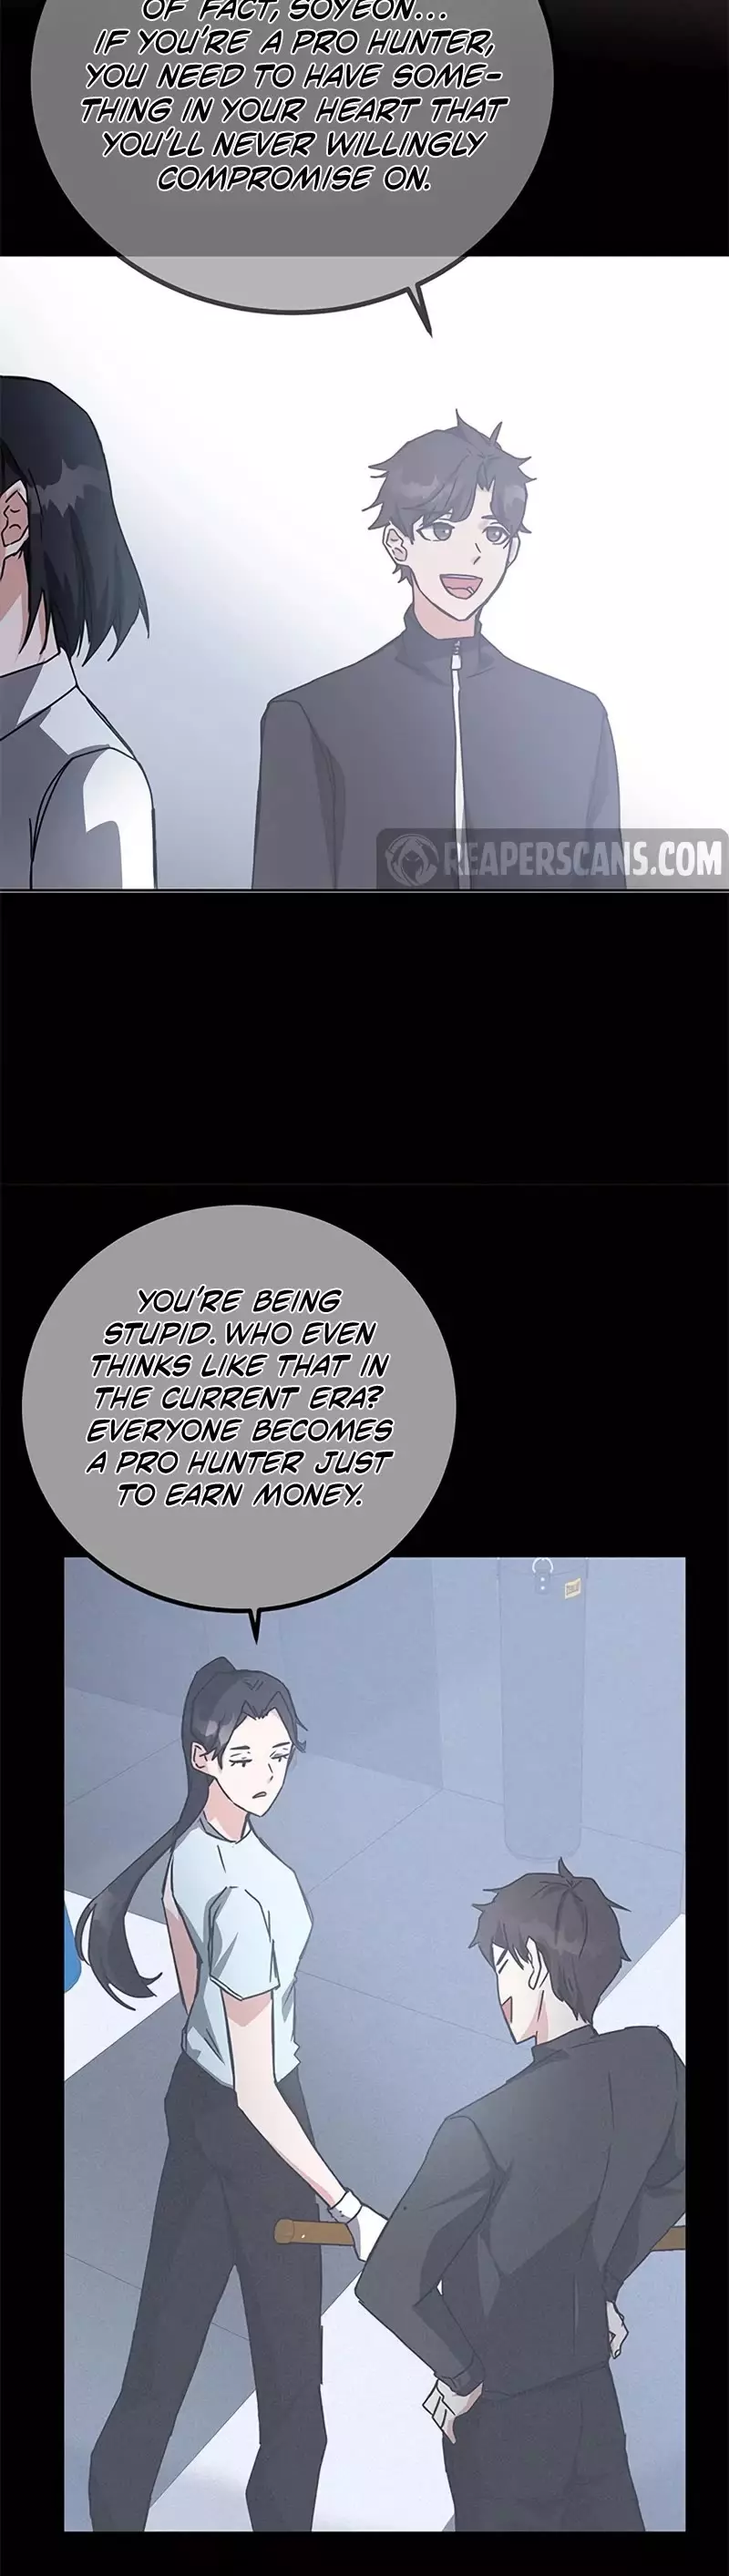 Transcension Academy - 19 page 29-6db5d3a0